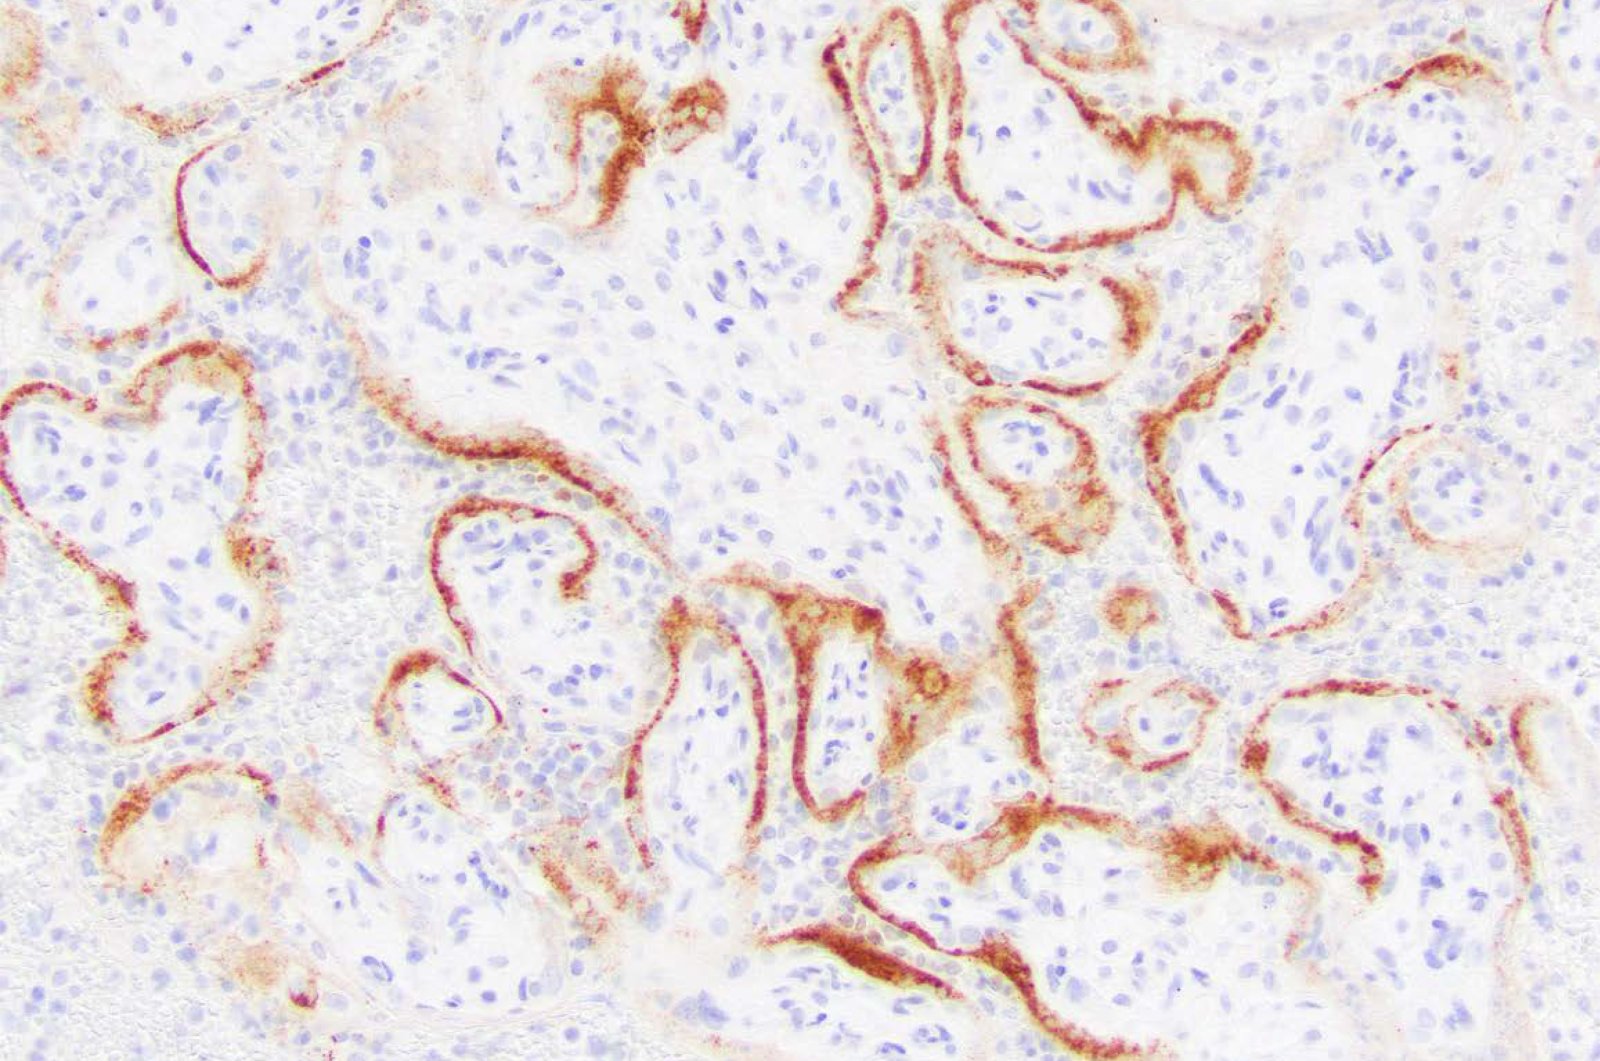 A microscope image shows placental cells from a stillbirth with SARS-CoV-2 infection indicated by the darker stains. (AP Photo)